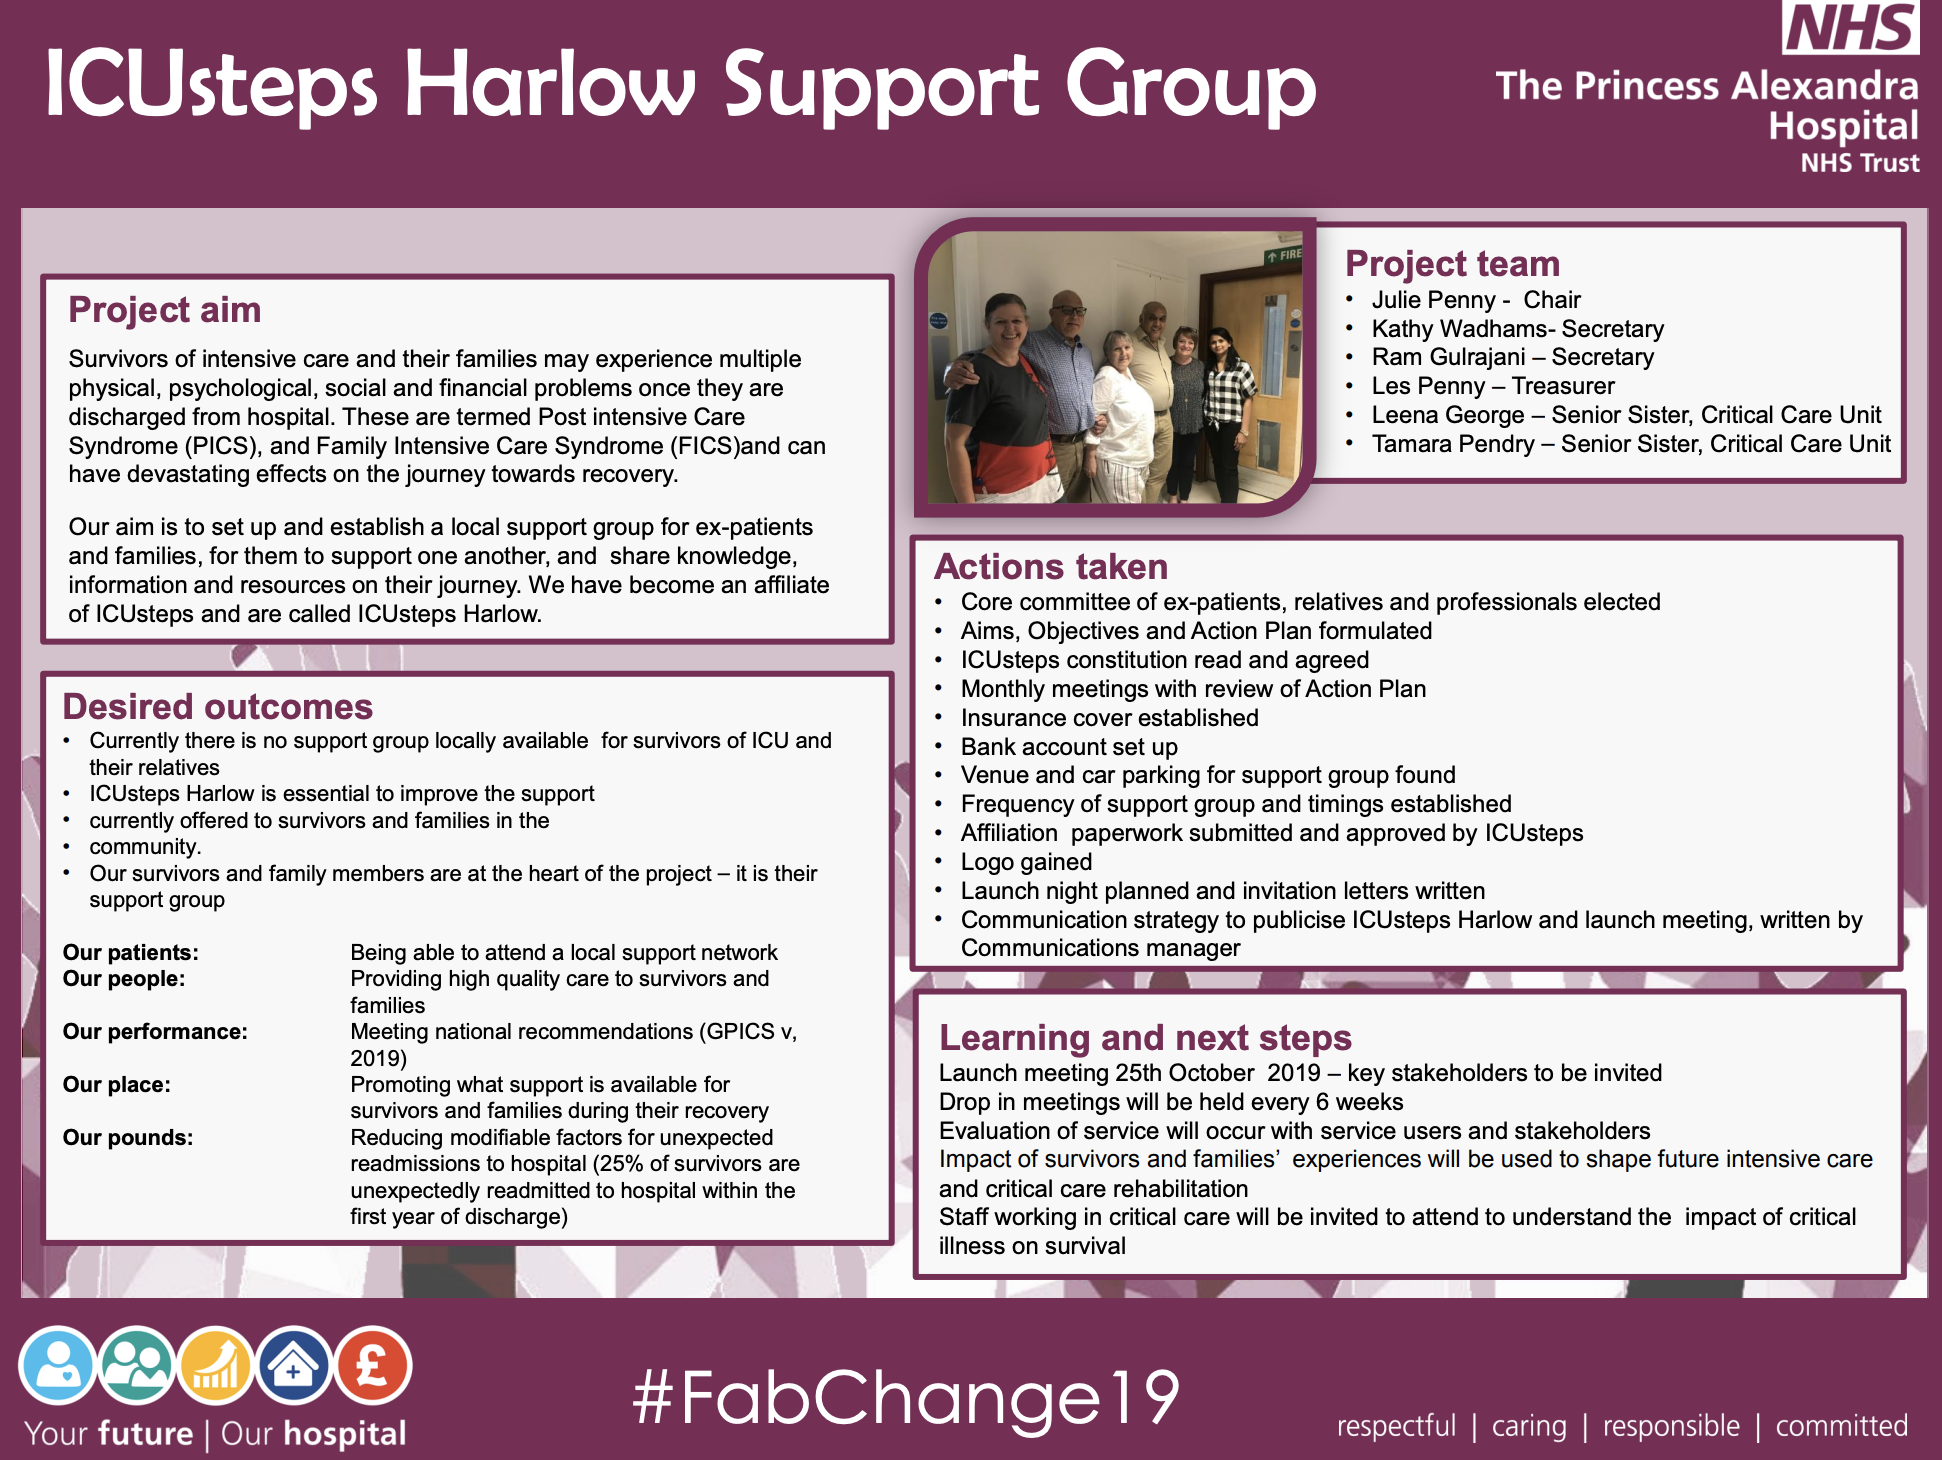 ICUsteps Harlow Support Groups - @QualityFirstPAH featured image